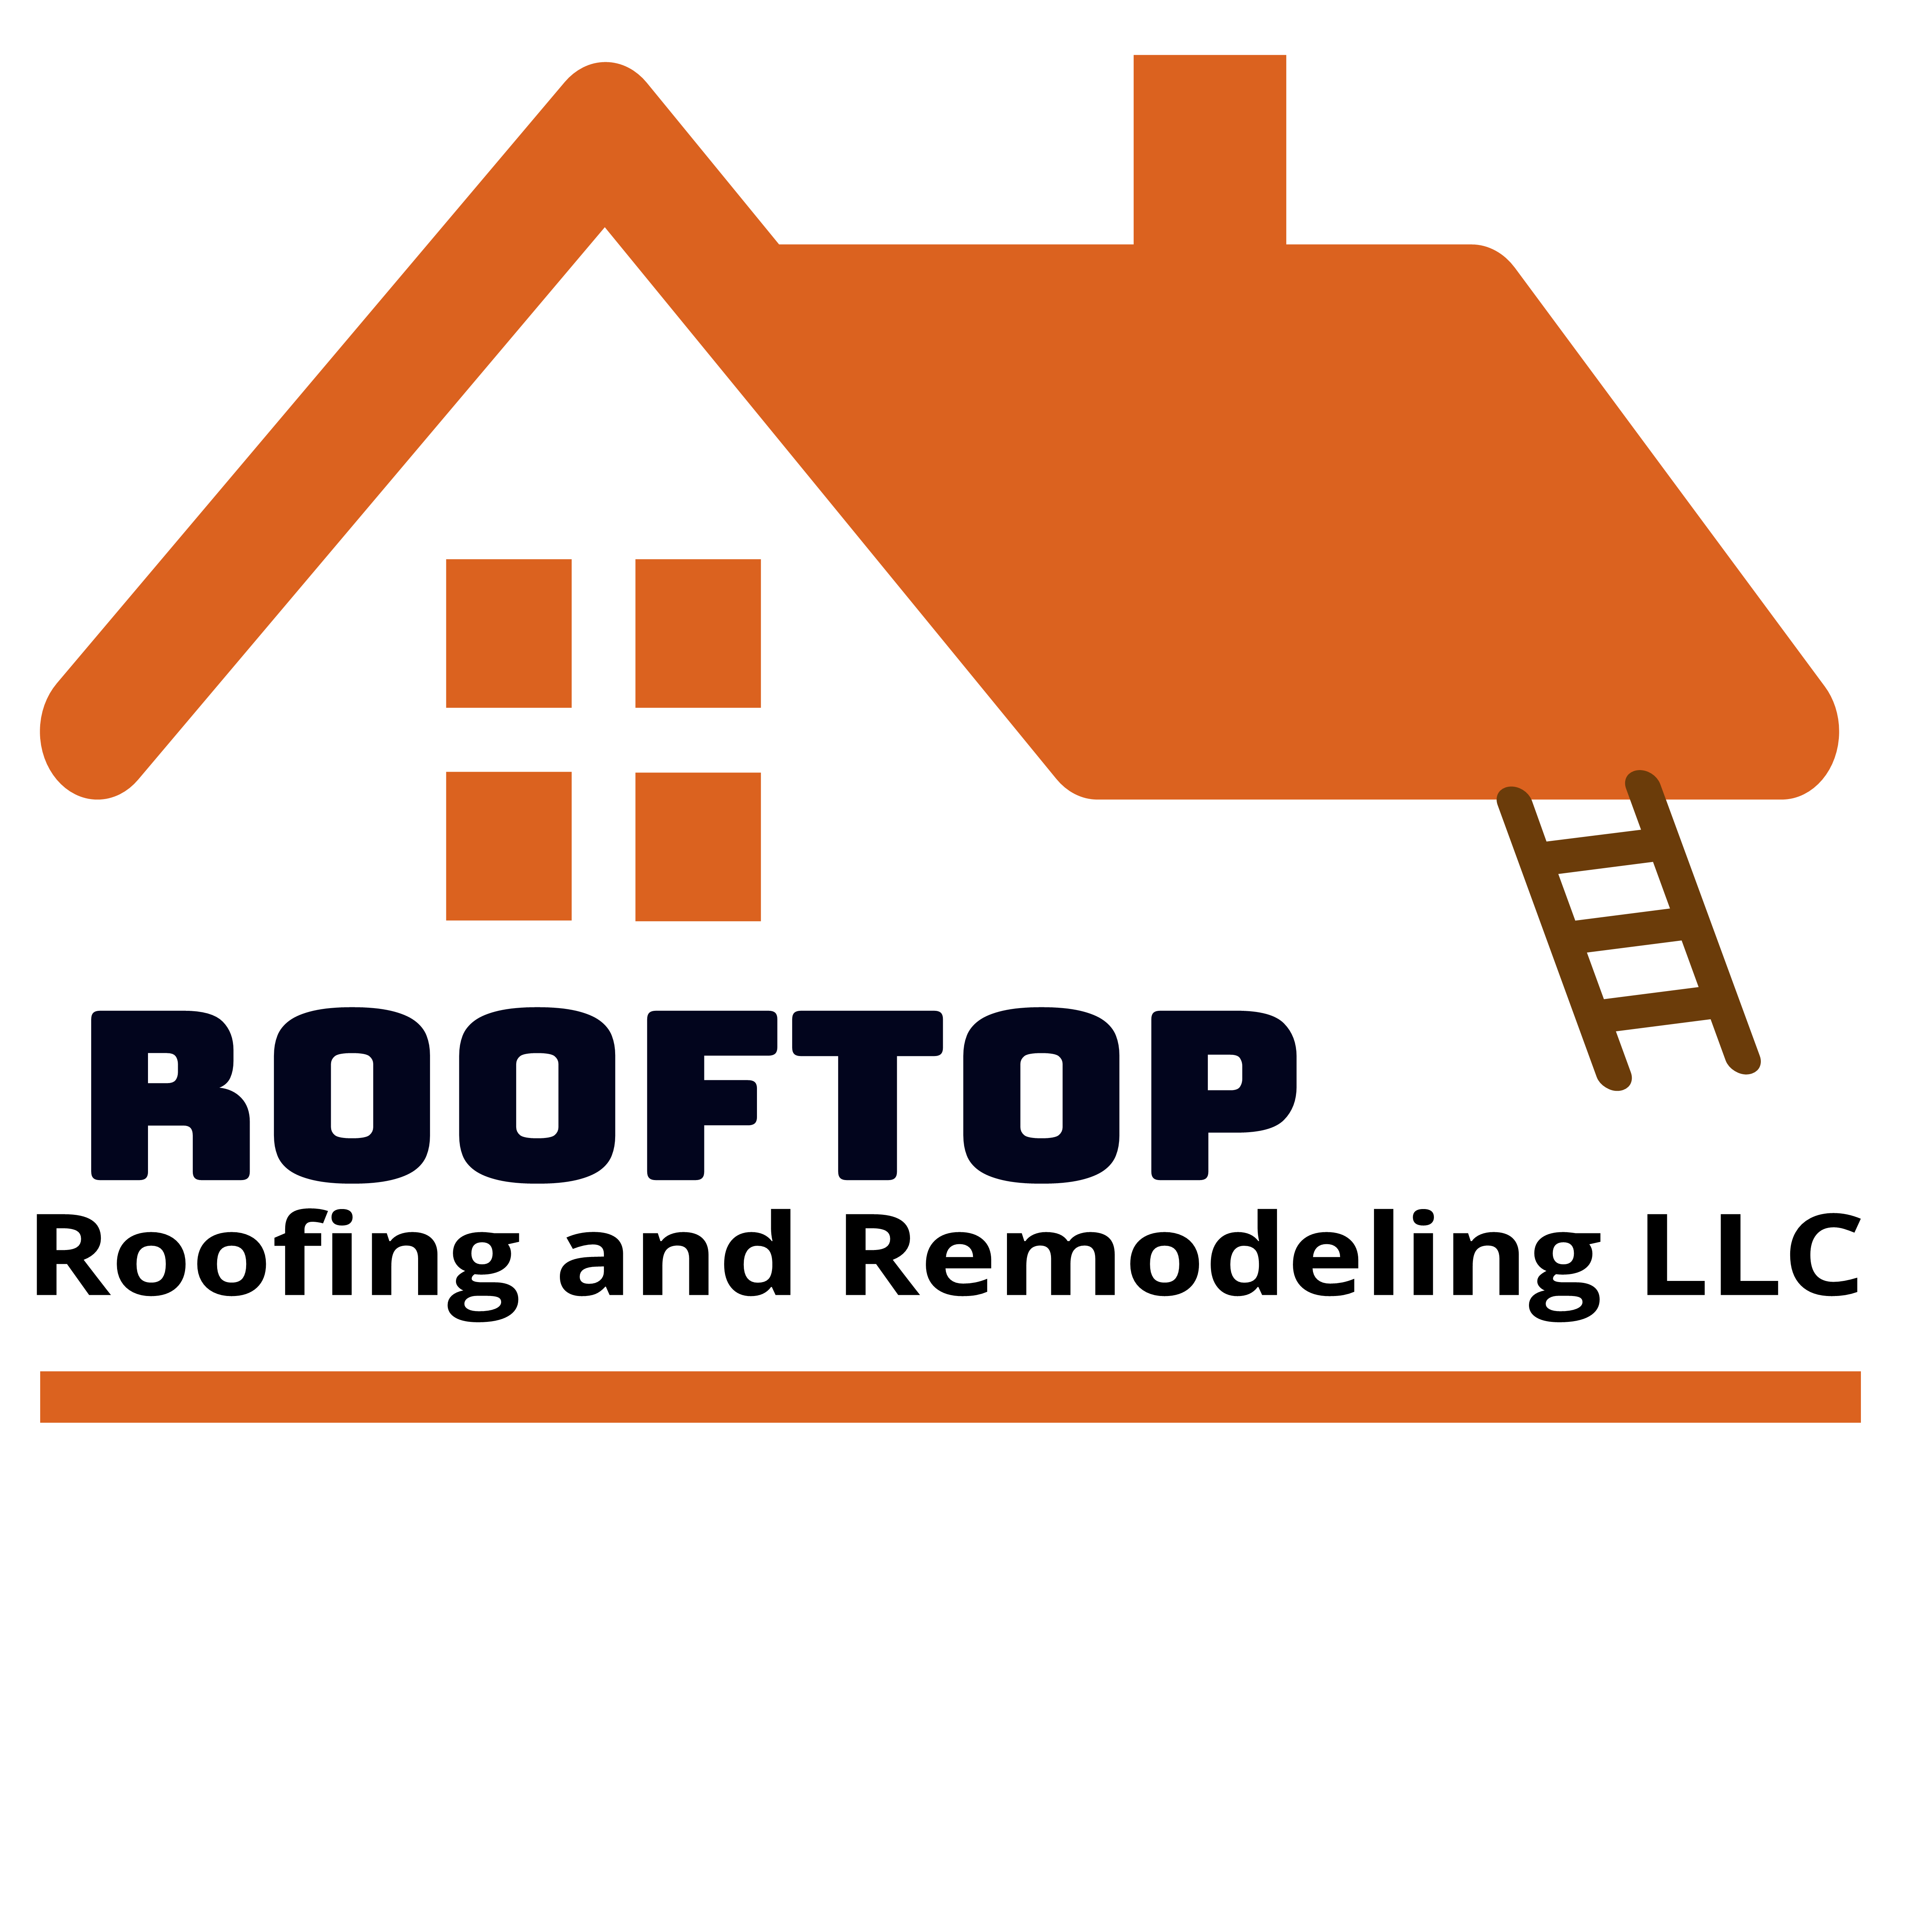 Rooftop Roofing and Remodeling LLC Logo